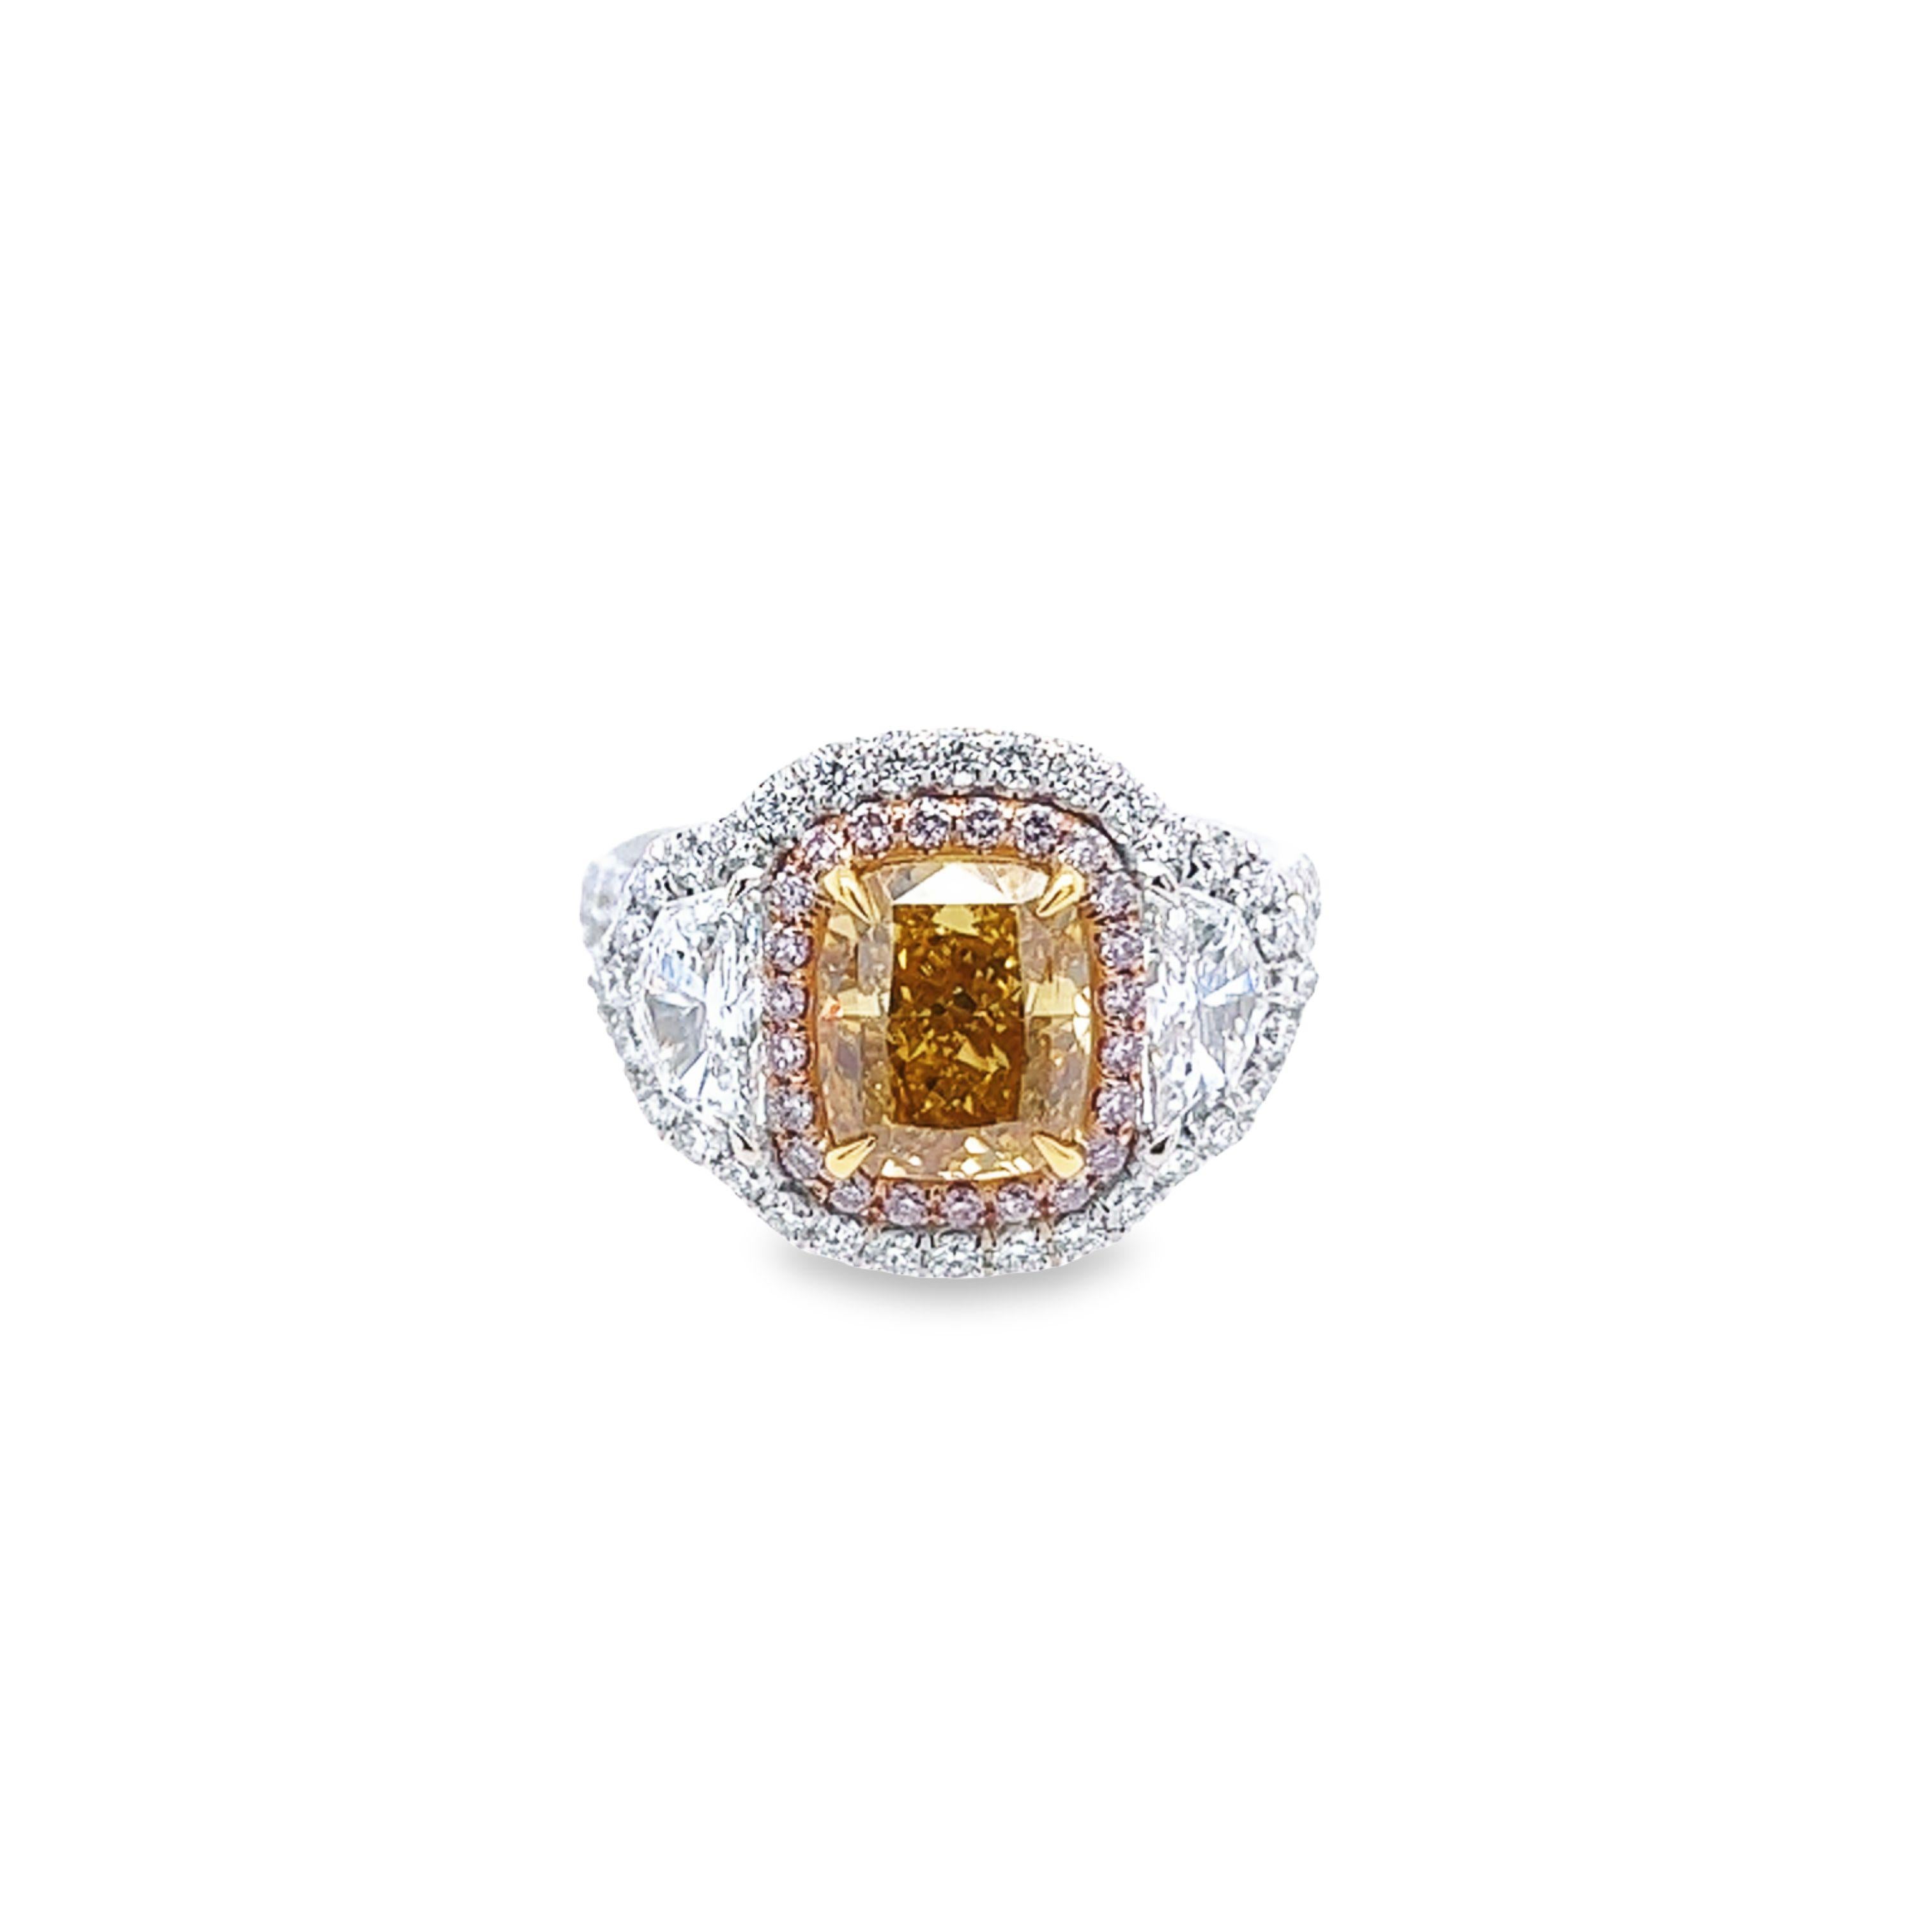 Rosenberg Diamonds & Co. 2.05 carat Cushion cut Fancy Intense Orange Yellow SI1 clarity is accompanied by a GIA certificate. This spectacular rare cushion is full of brilliance and is set in a handmade platinum & 18k white gold setting with